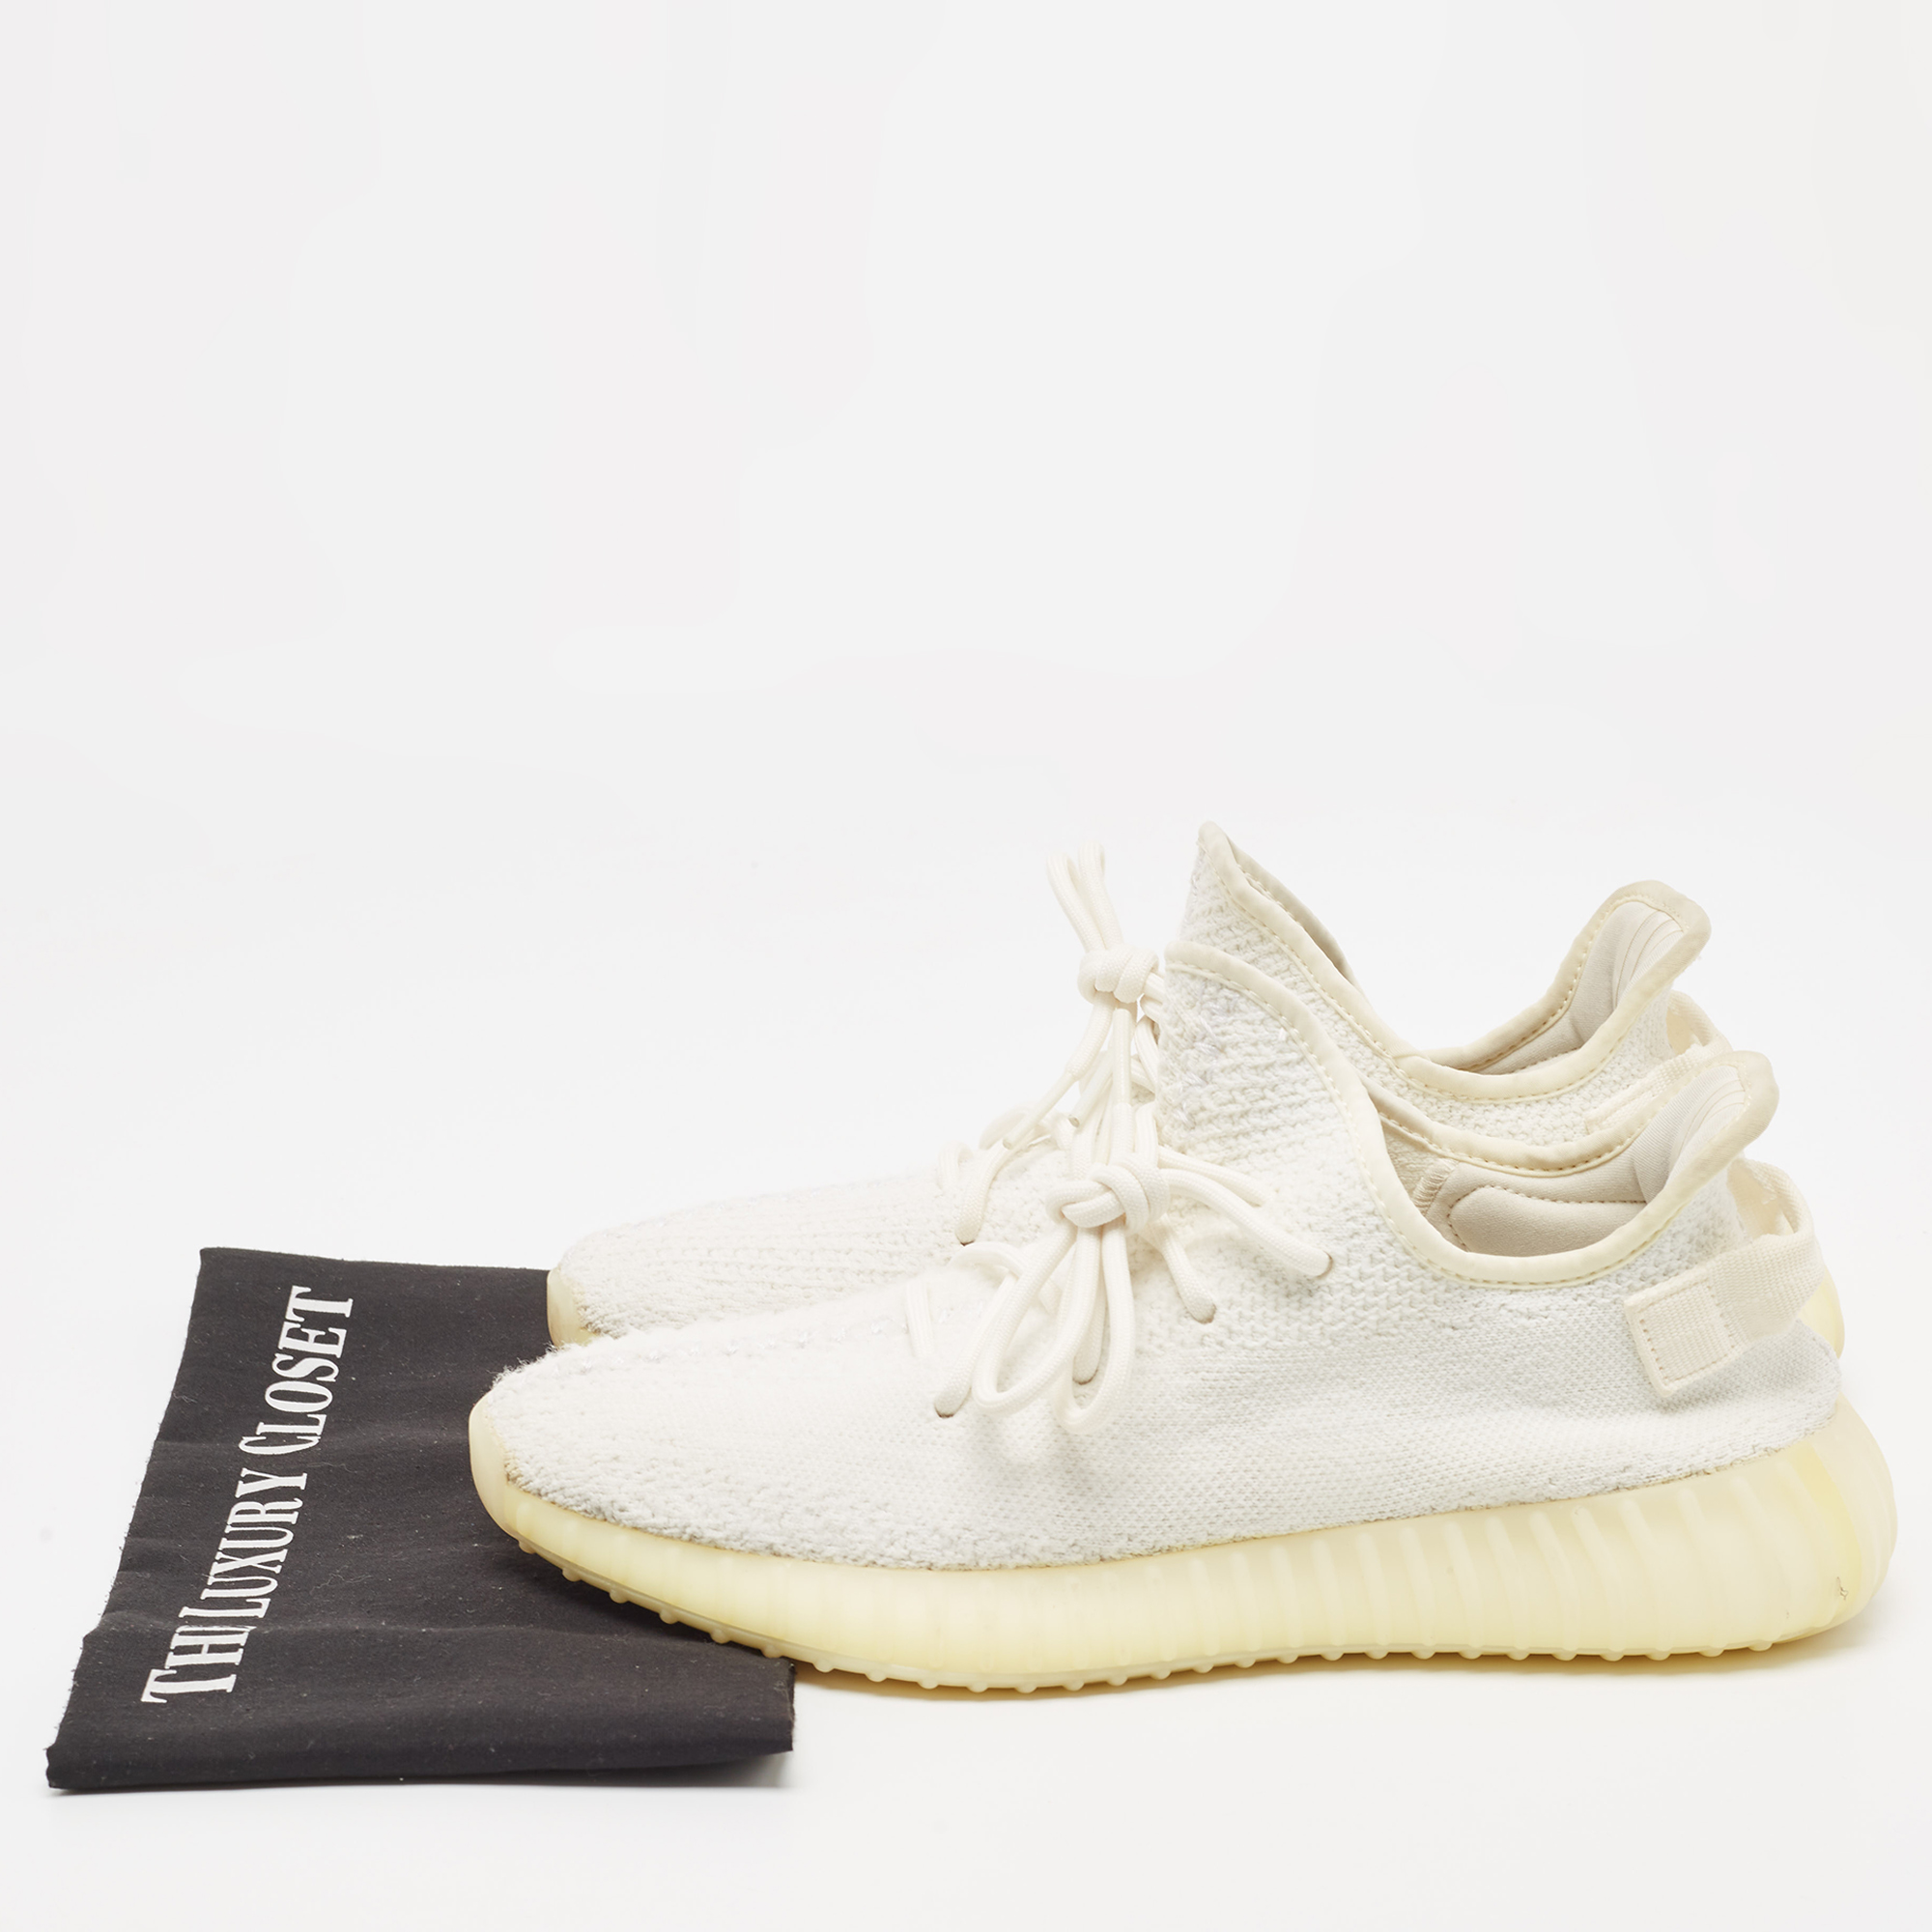 Adidas X Yeezy White Cotton Knit Fabric Boost 350 V2 Triple White Sneakers Size 43 1/3